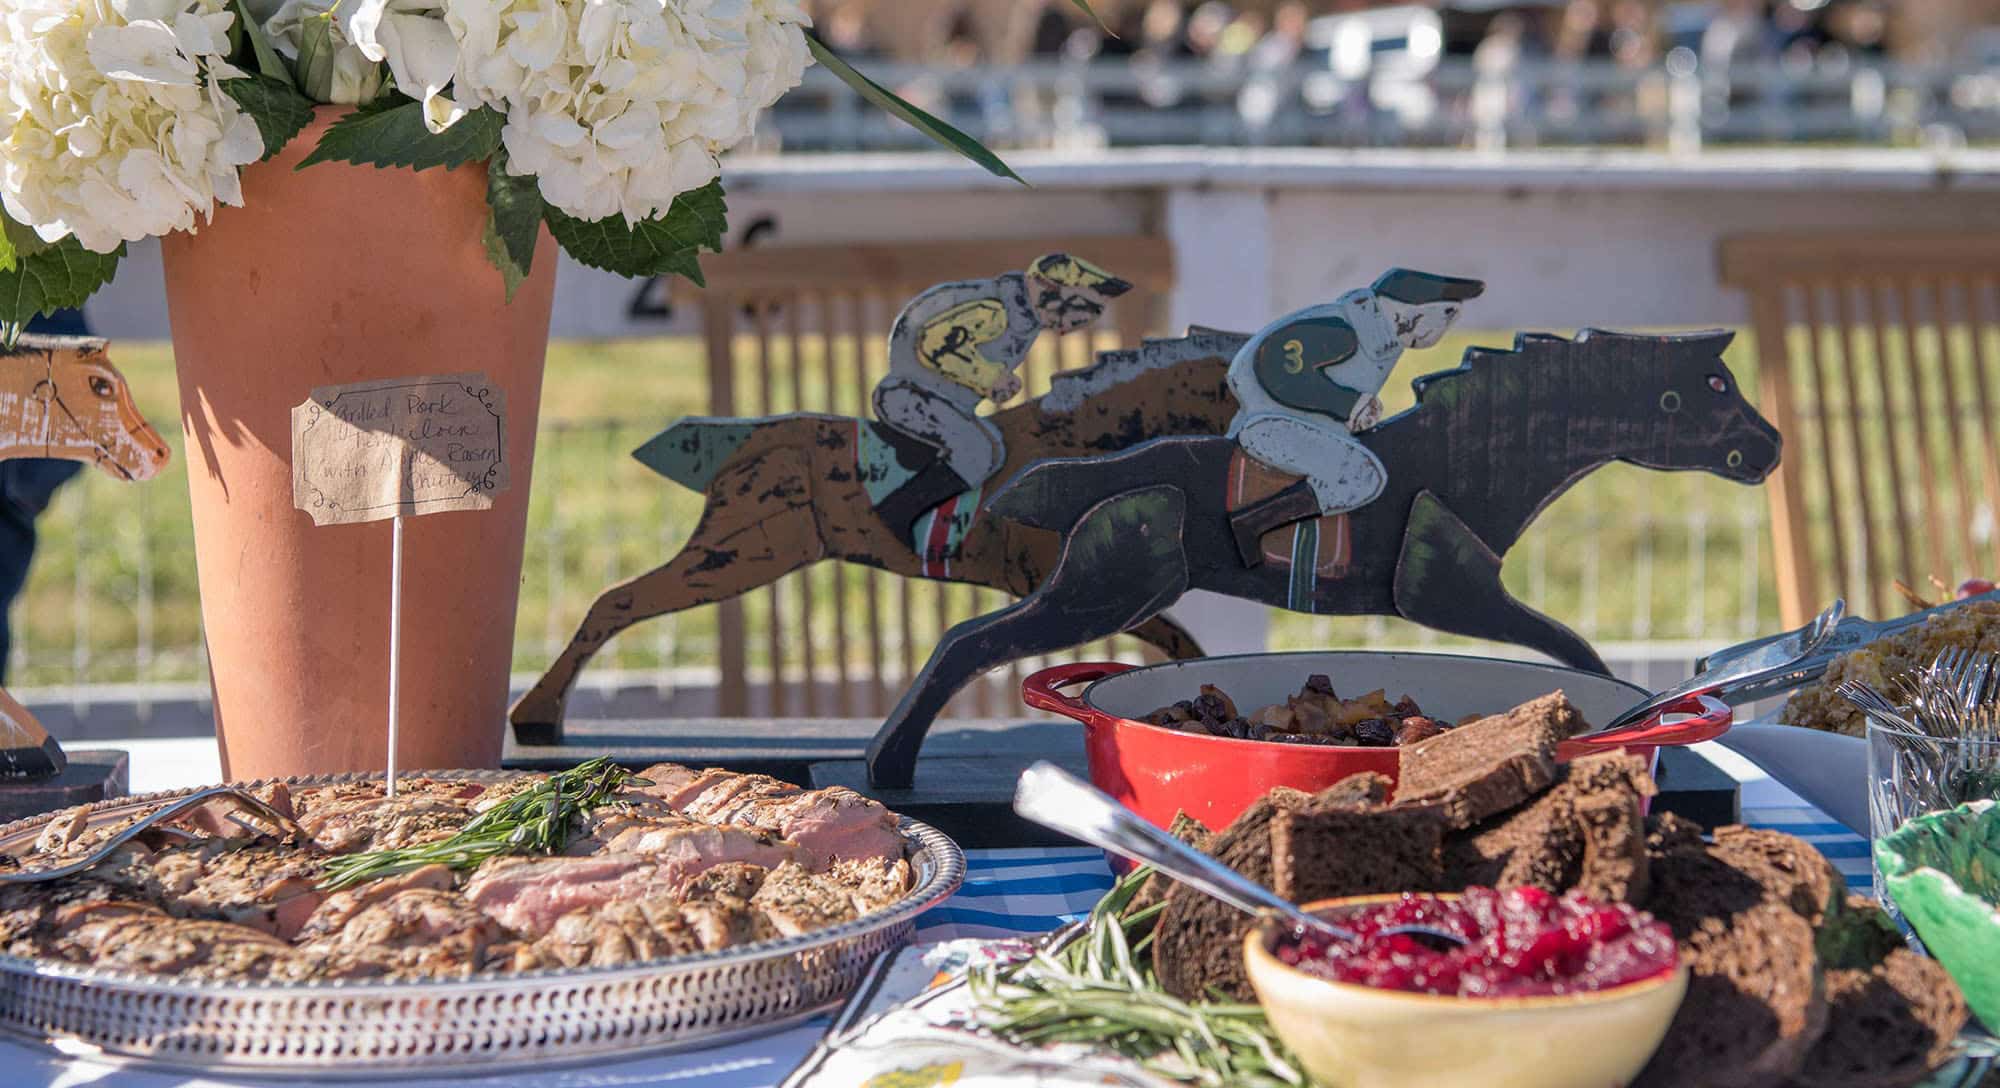 Equestrian decor and food at Montpelier Hunt Races tailgate, Image by © R.L. Johnson for Wine & Country Life